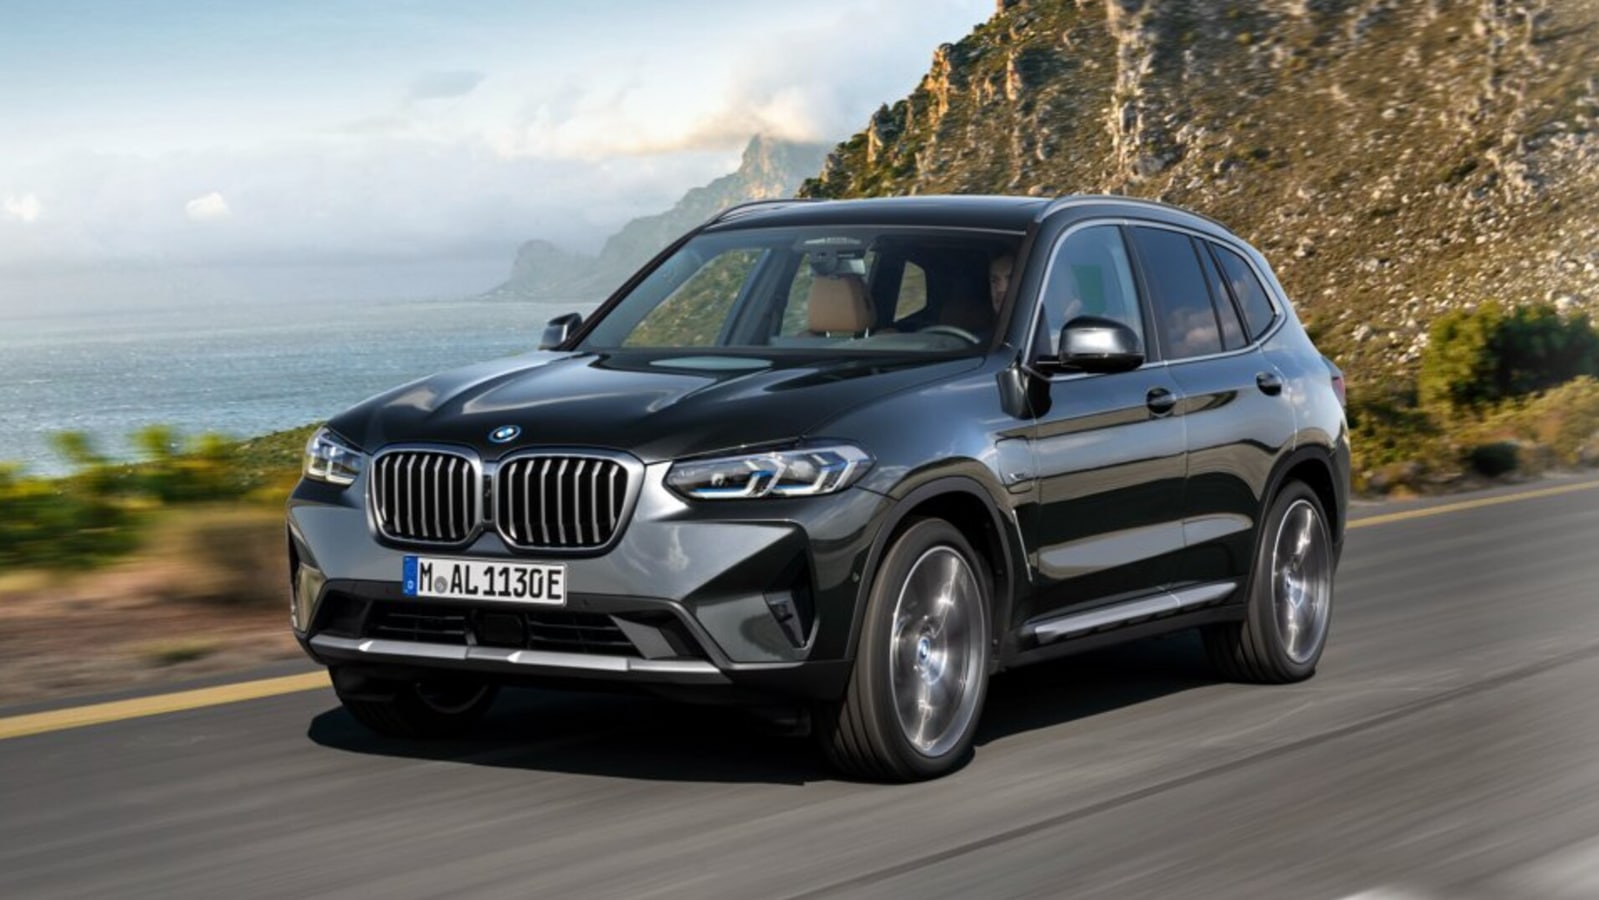 BMW X3 plug-in hybrid SUVs to be manufactured in South Africa from now on